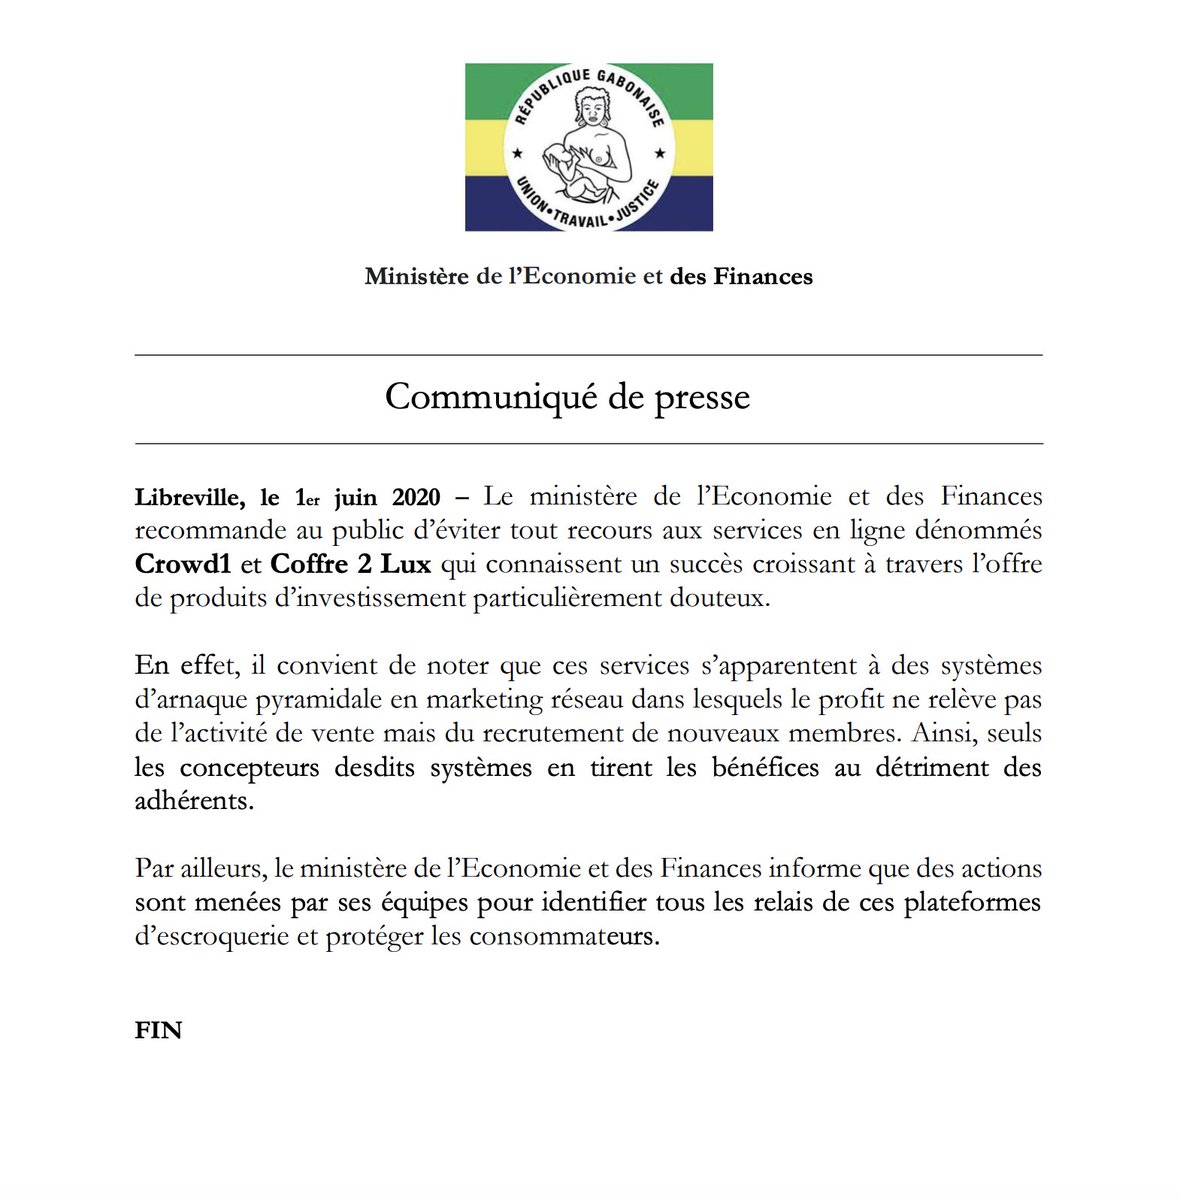 Early June, the Ministry of Economy and Finances in Gabon warned its citizens against Crowd1 and labelled it a pyramid scheme. Link to the document (in French) >  http://www.economie.gouv.ga/object.getObject.do?id=1573